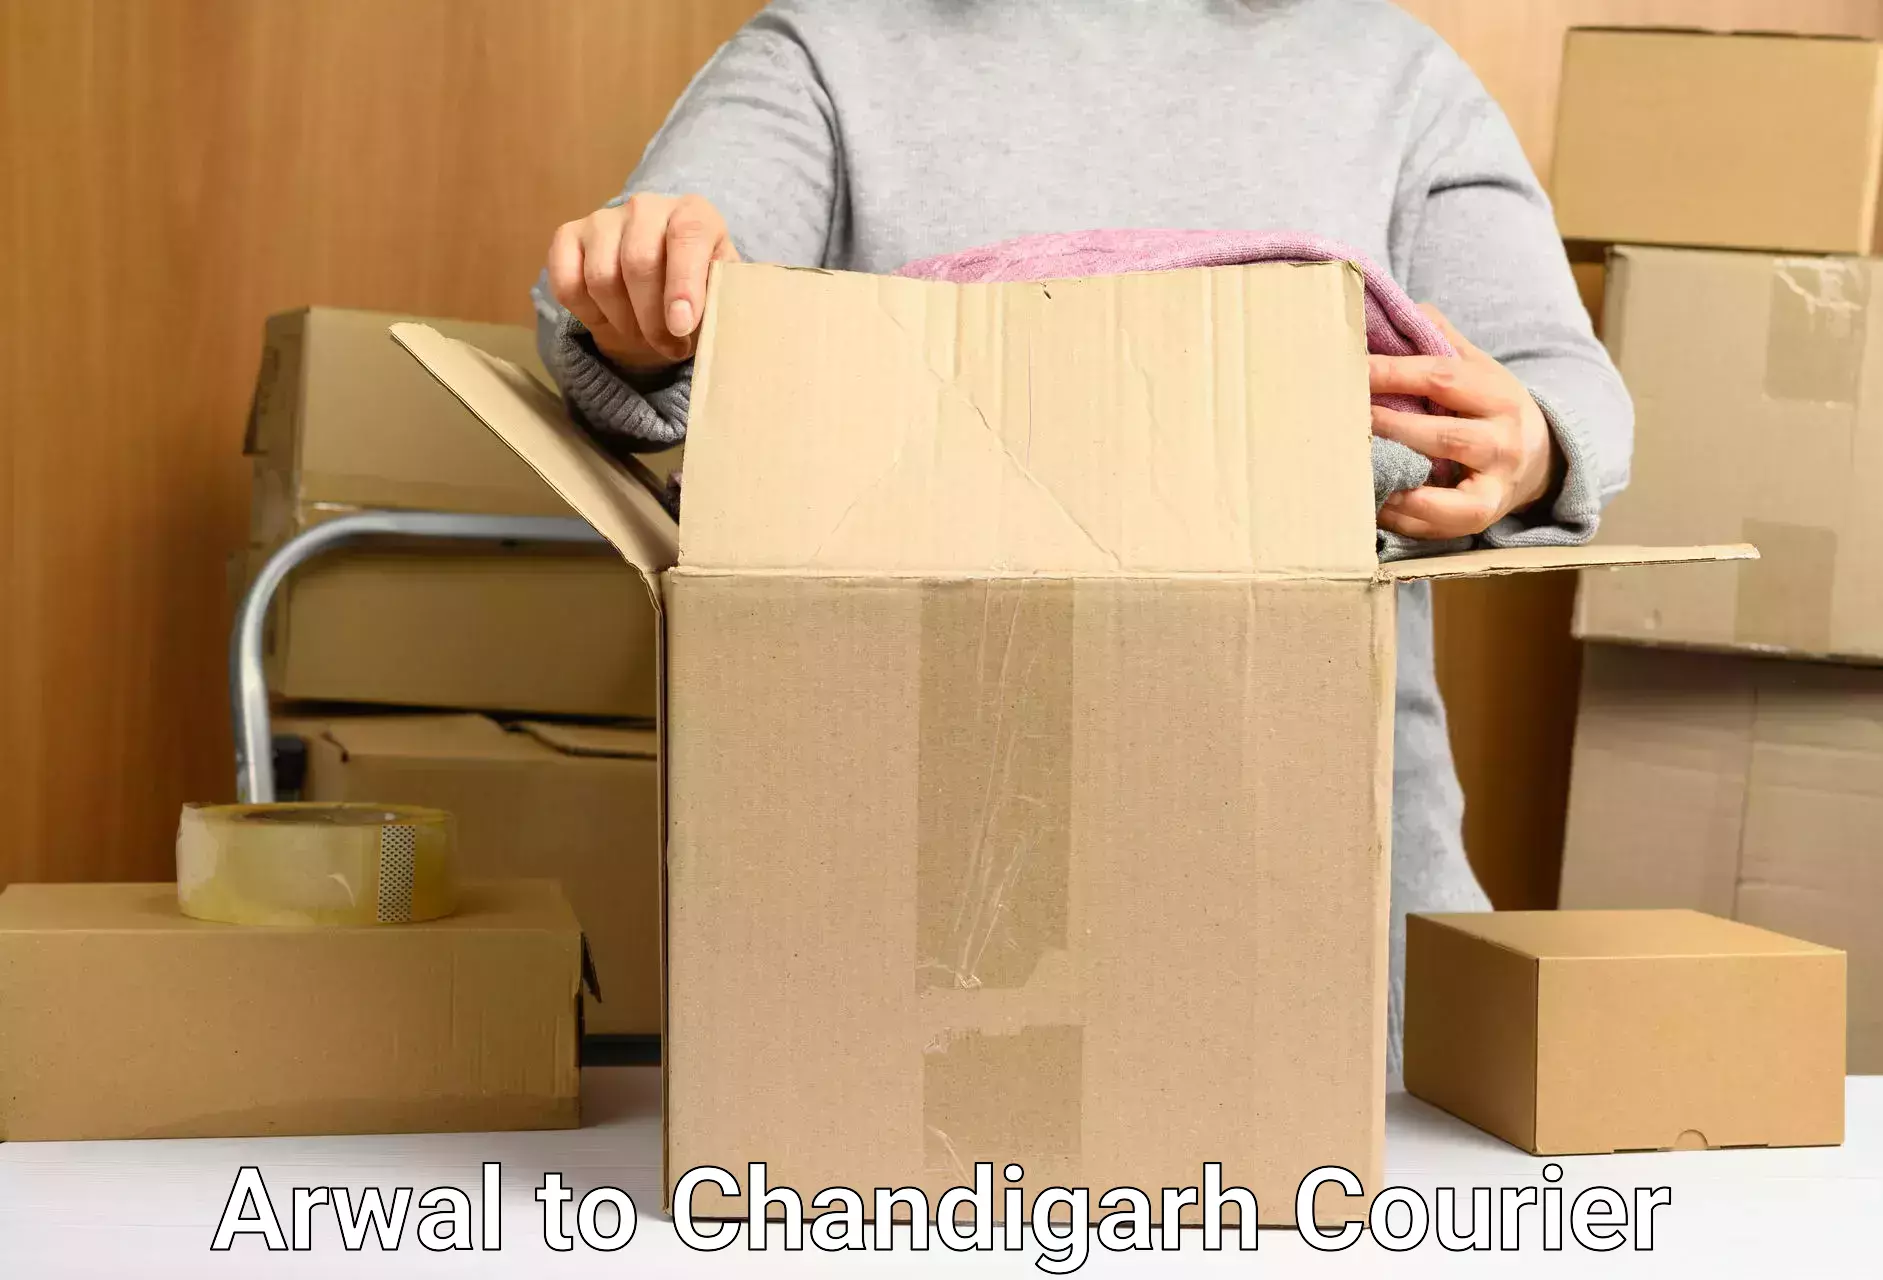 Customer-focused courier Arwal to Chandigarh